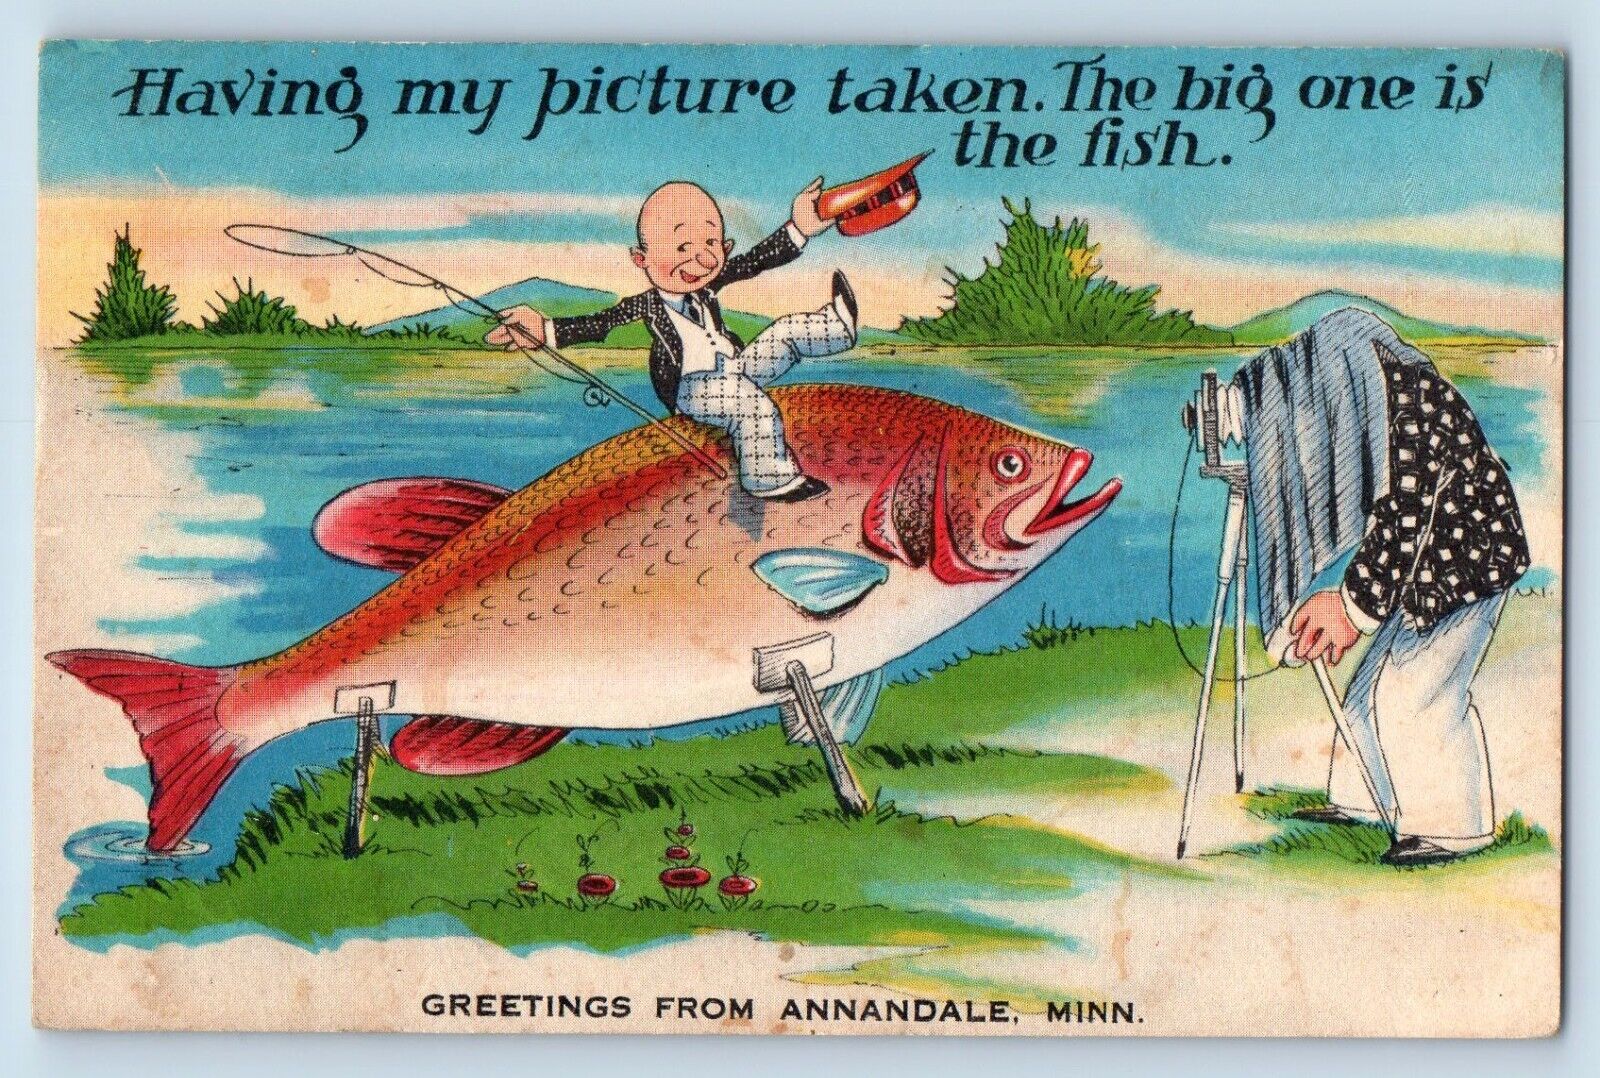 Annandale Minnesota Postcard Greetings Exaggerated Fishing Picture 1958 Vintage